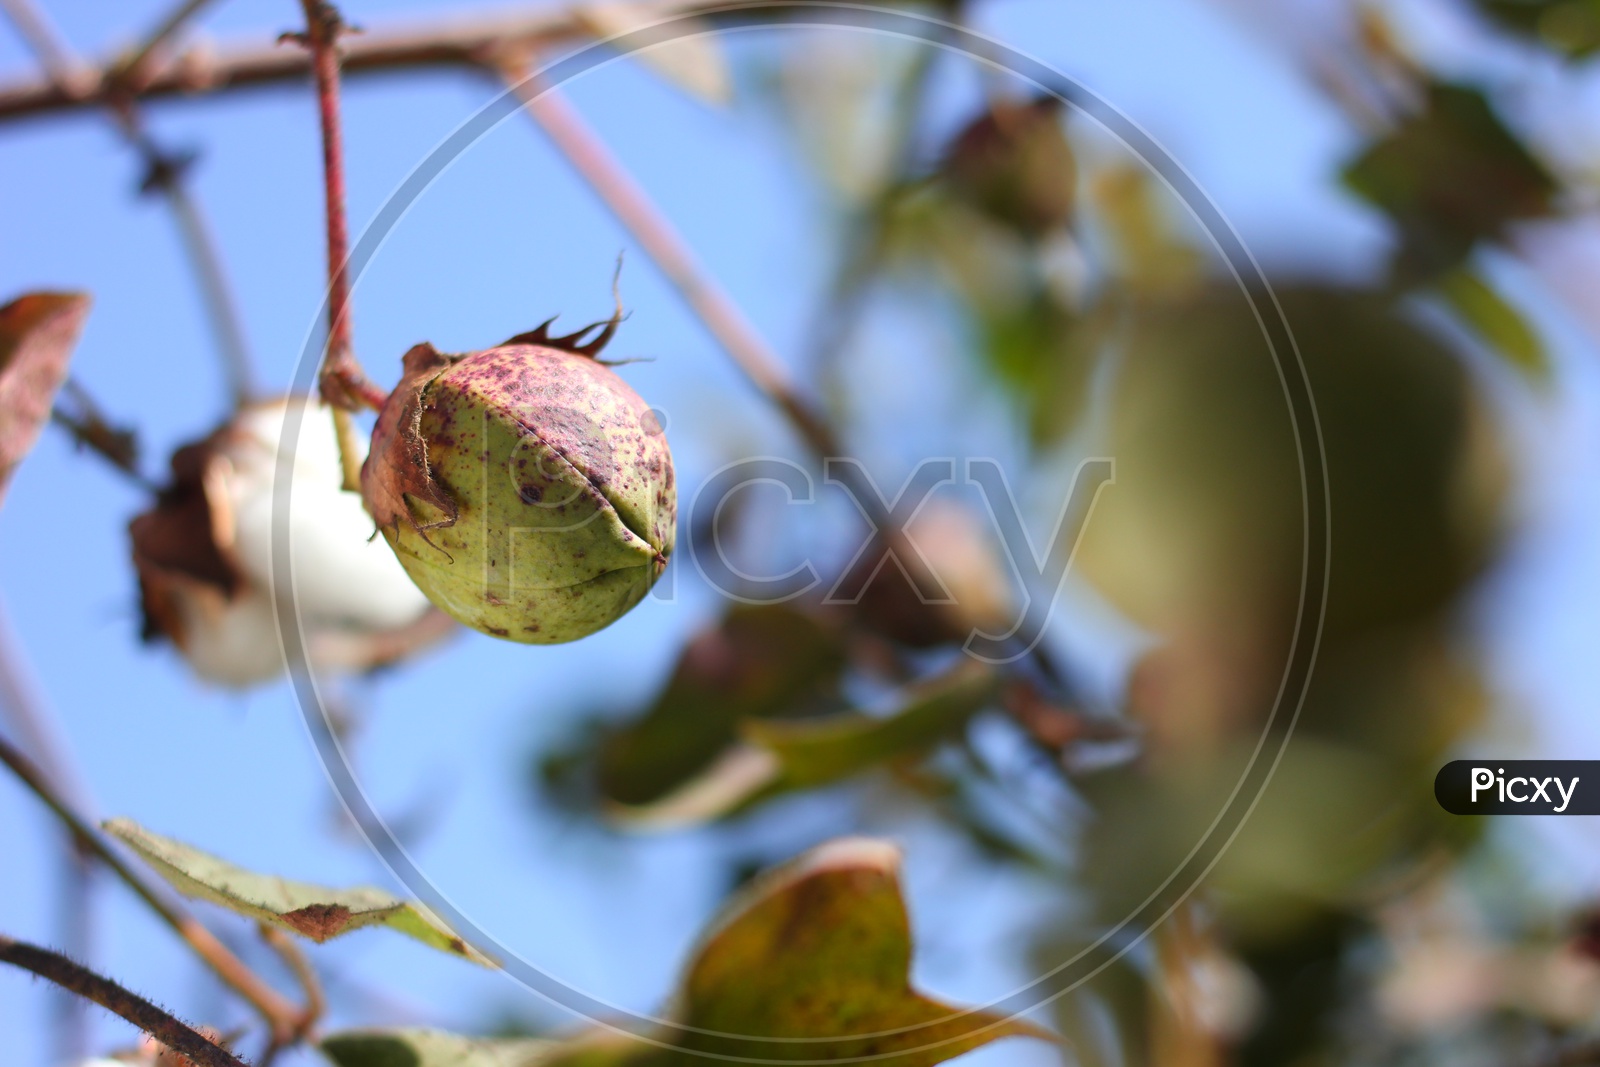 Cotton Ball Growing on a Cotton Plant